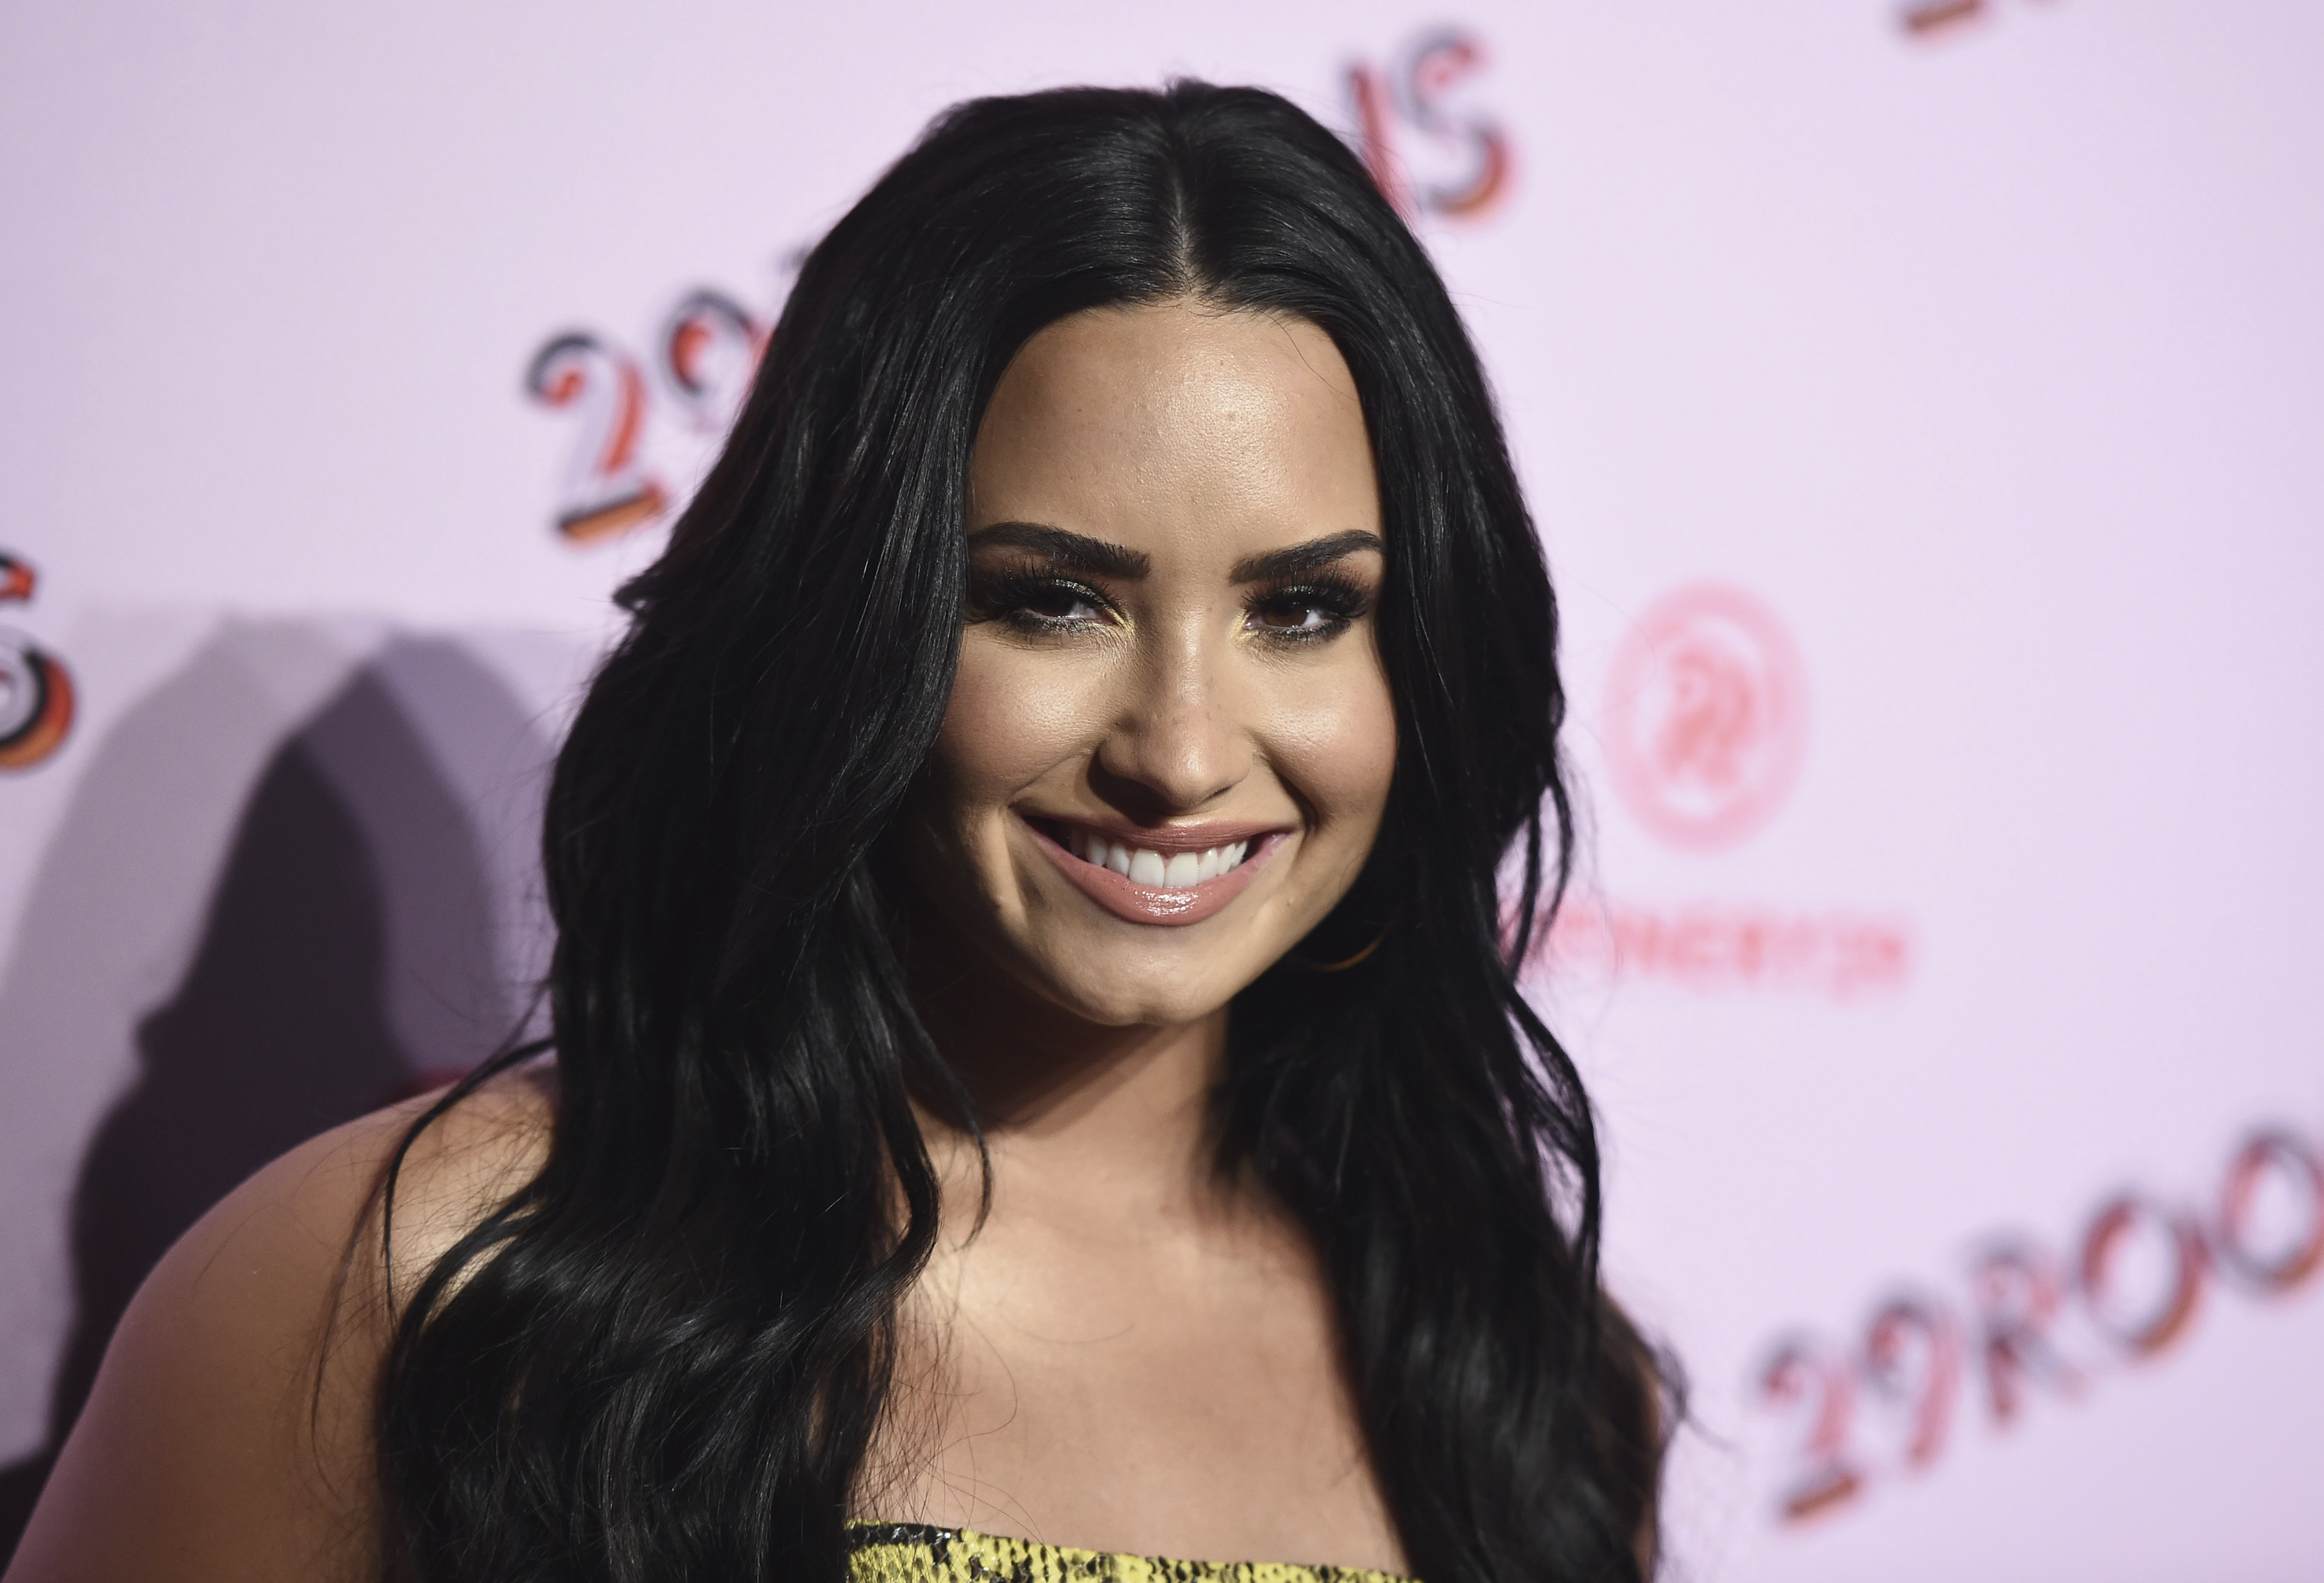 AP Source: Demi Lovato released from hospital | Inquirer Entertainment